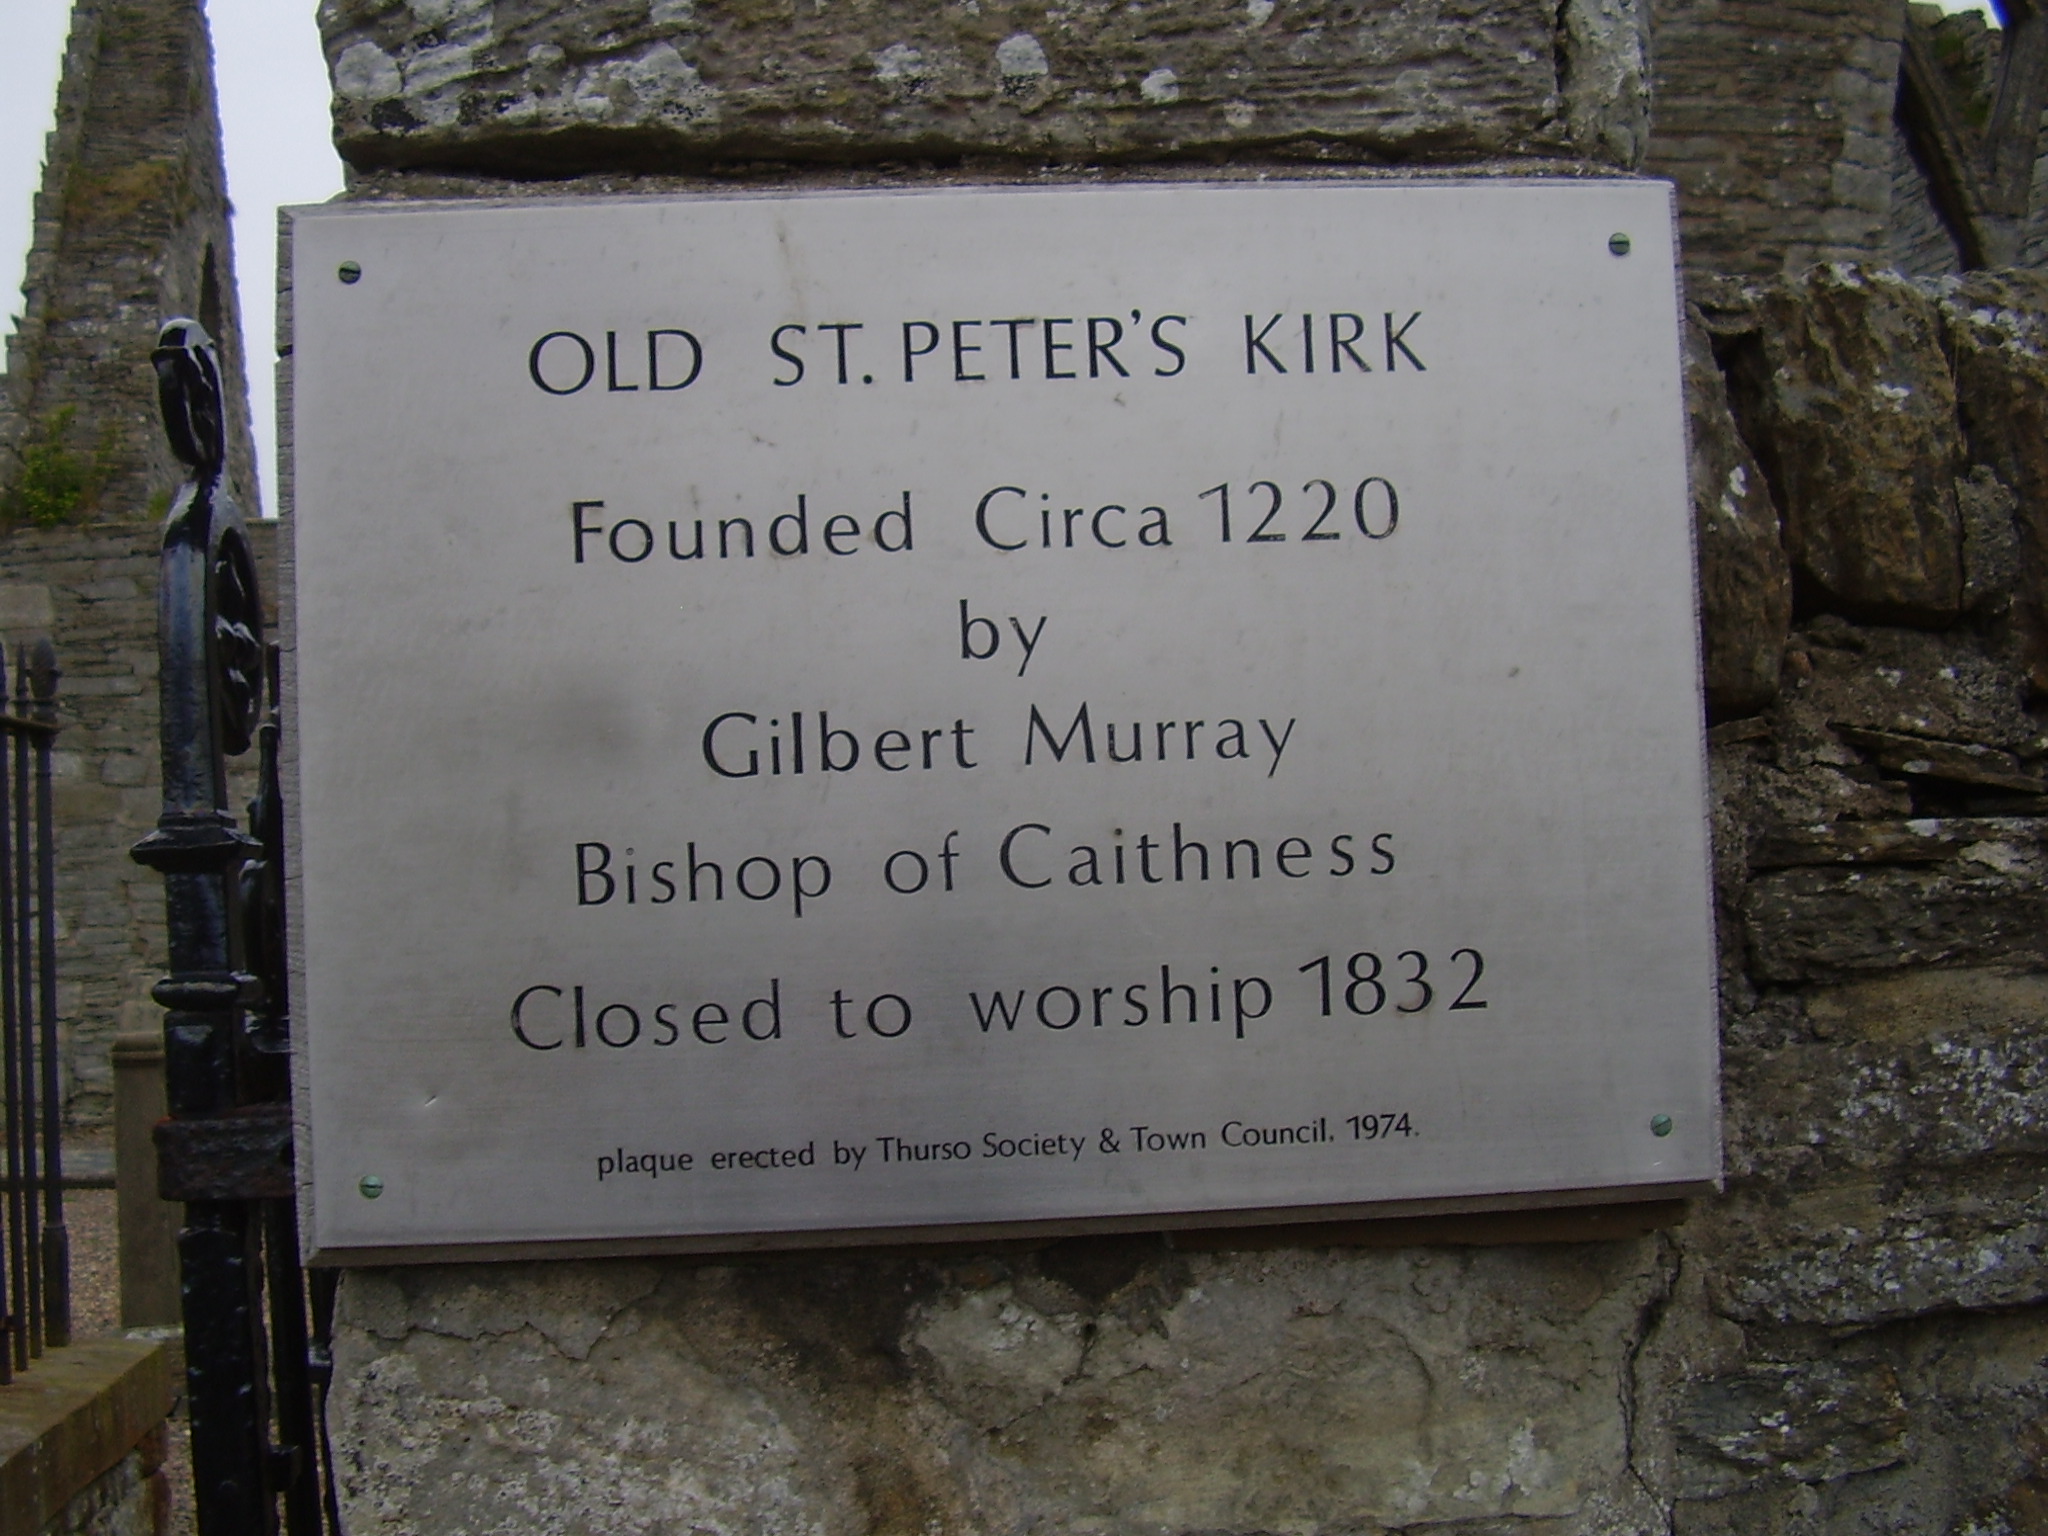 Founded ca. 1220, closed 1832